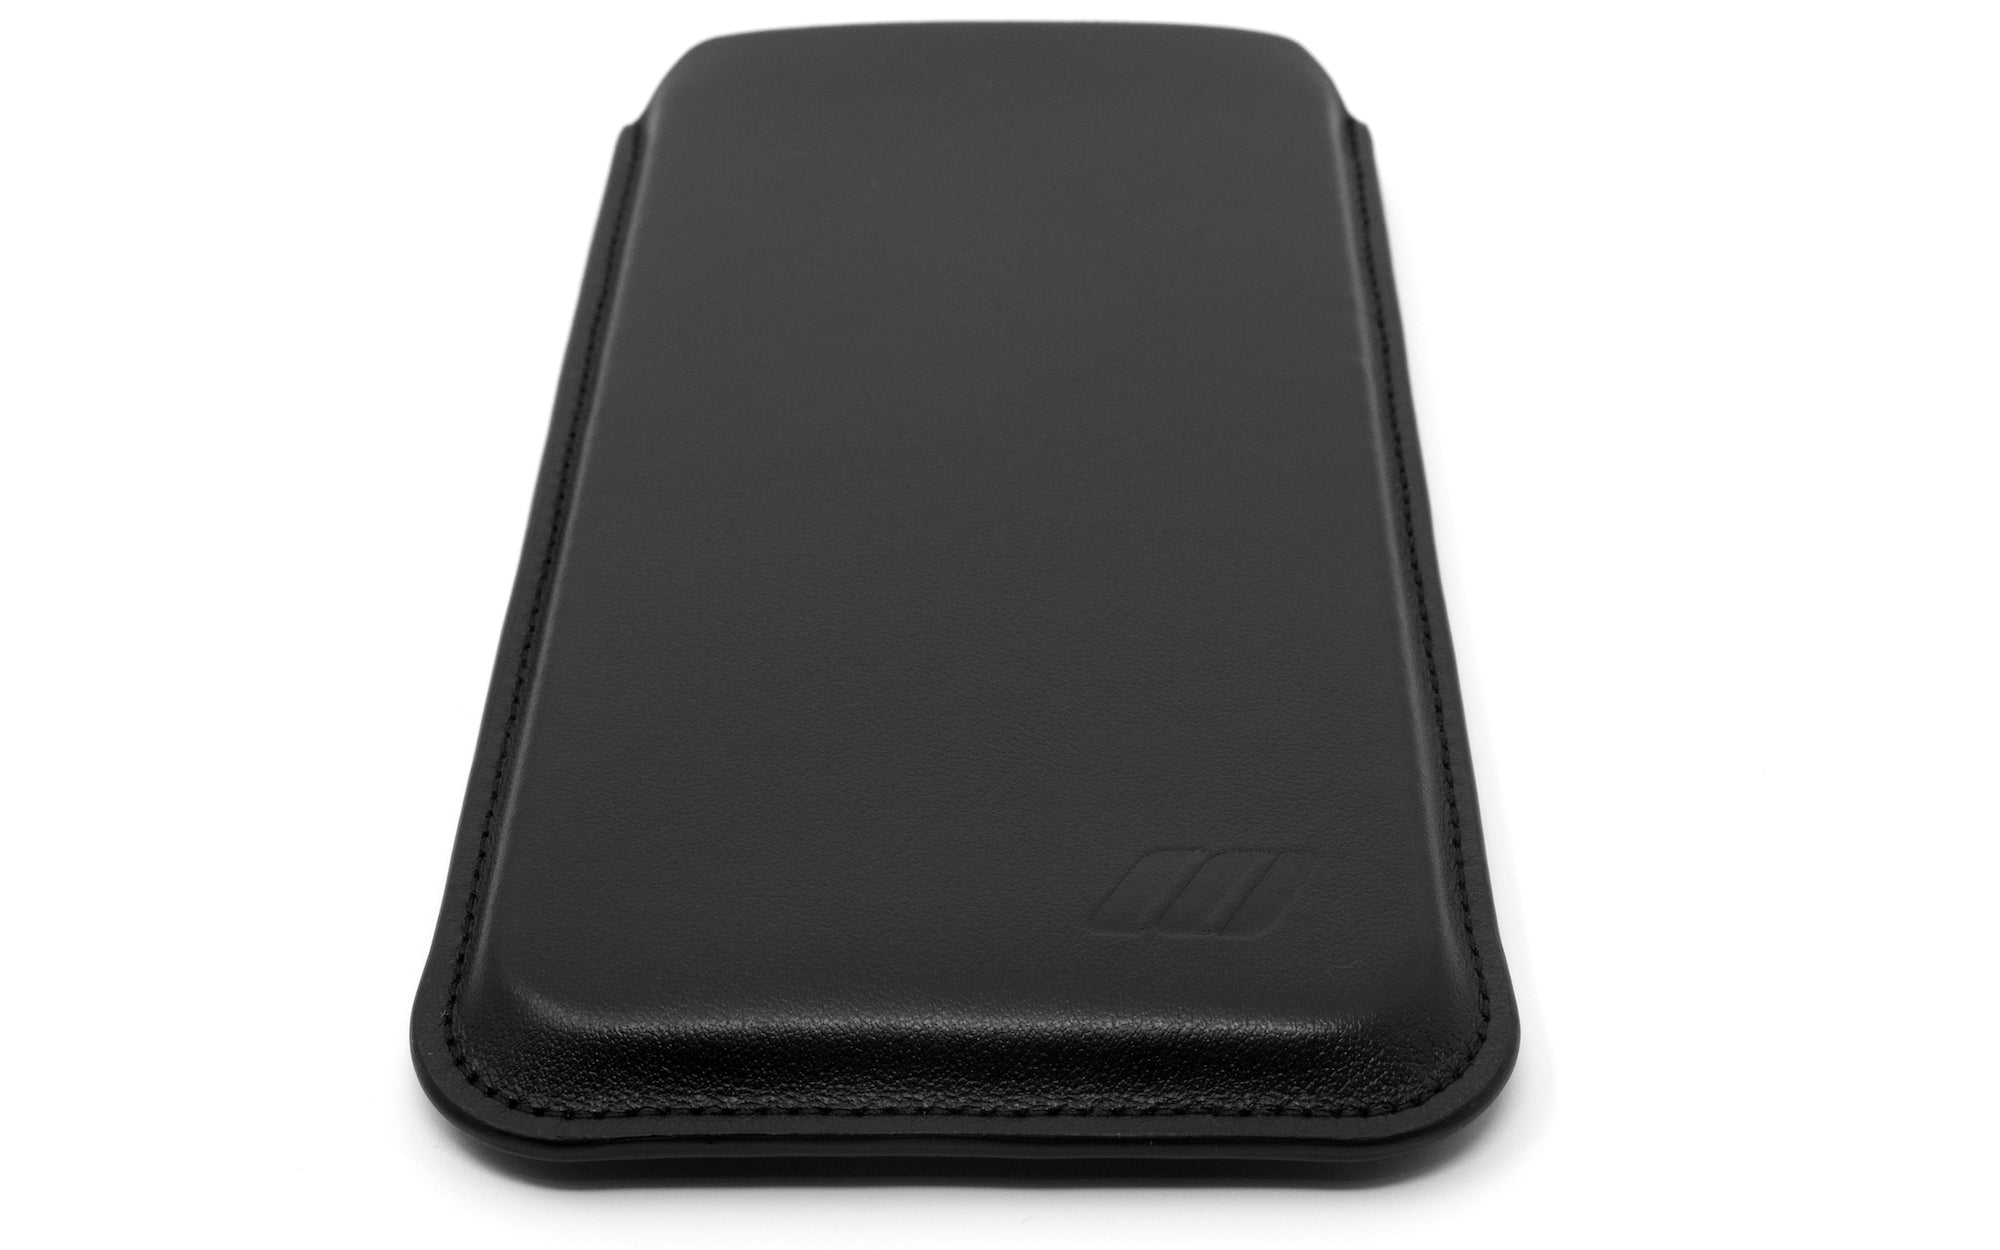 Apple iPhone 13 Pro Leather Sleeve Case - Skinny Fit - Black